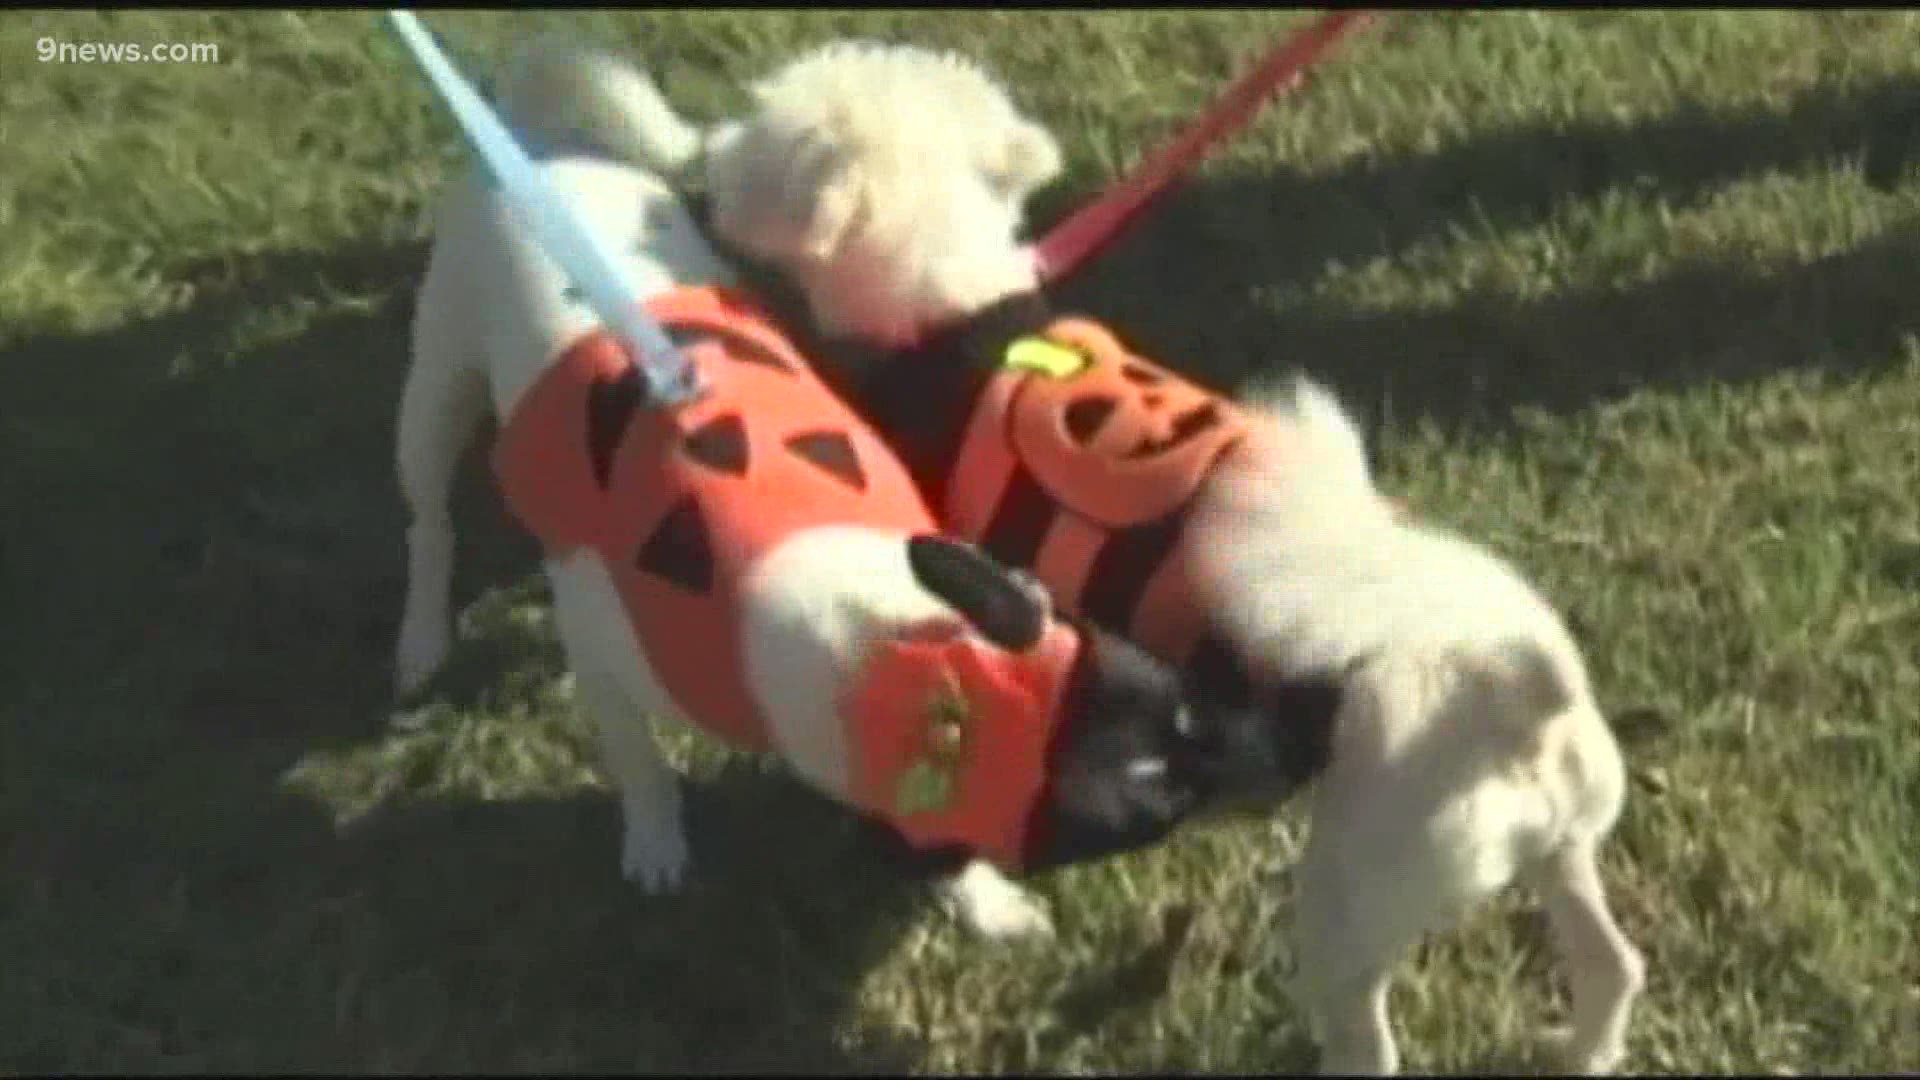 Joan Thielen with the Denver Dumb Friends League has advice on how to  keep your pet safe during Halloween.